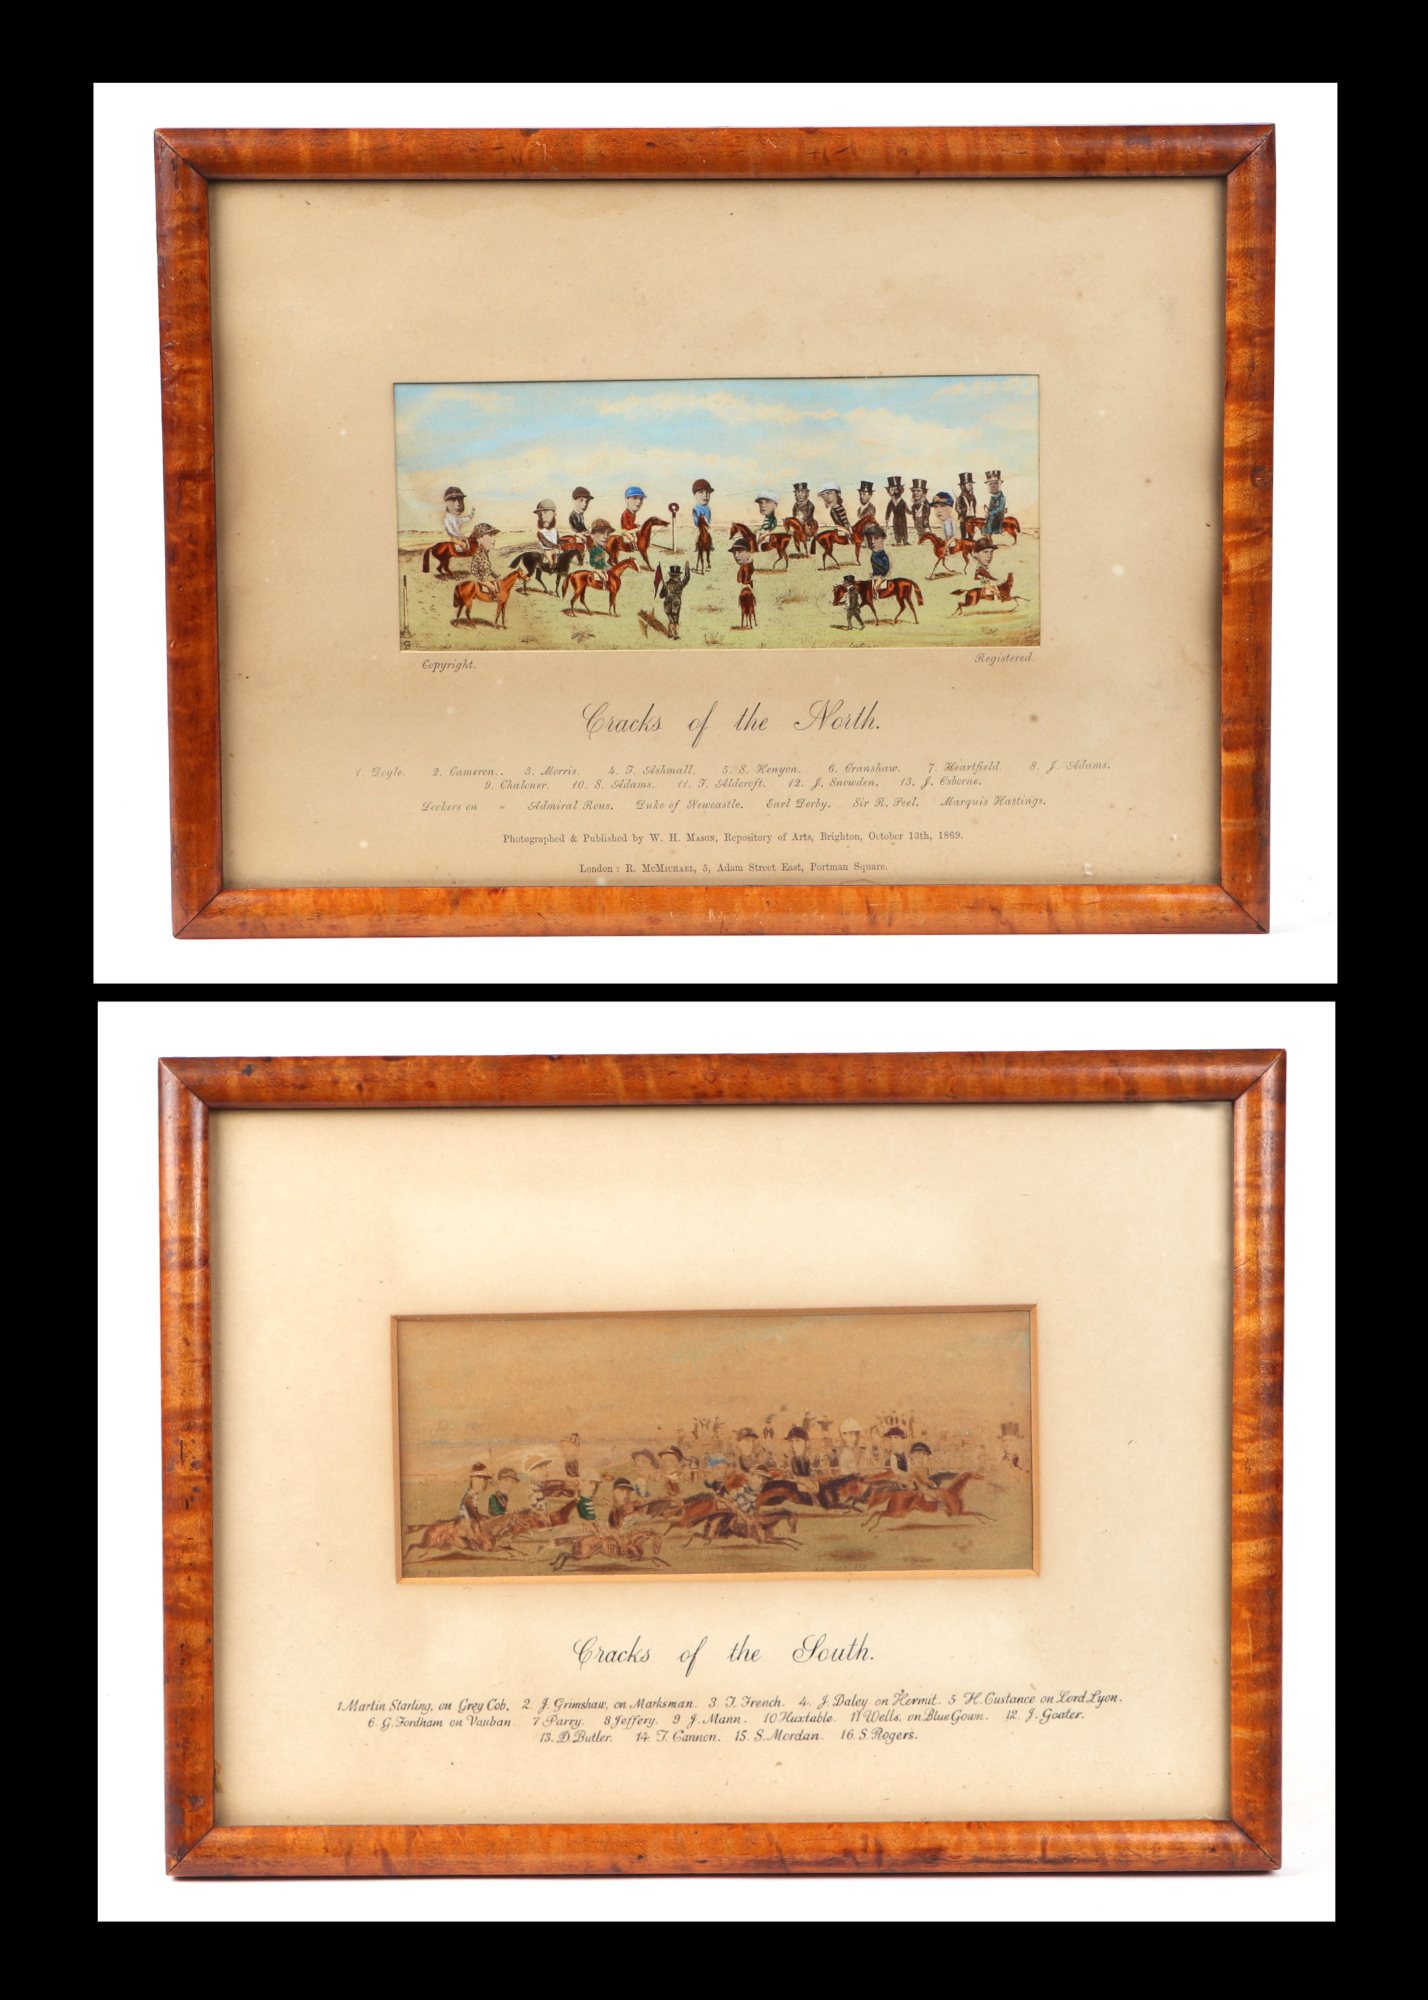 Horse racing interest. A coloured horse racing print, "Cracks of the North", photographed and